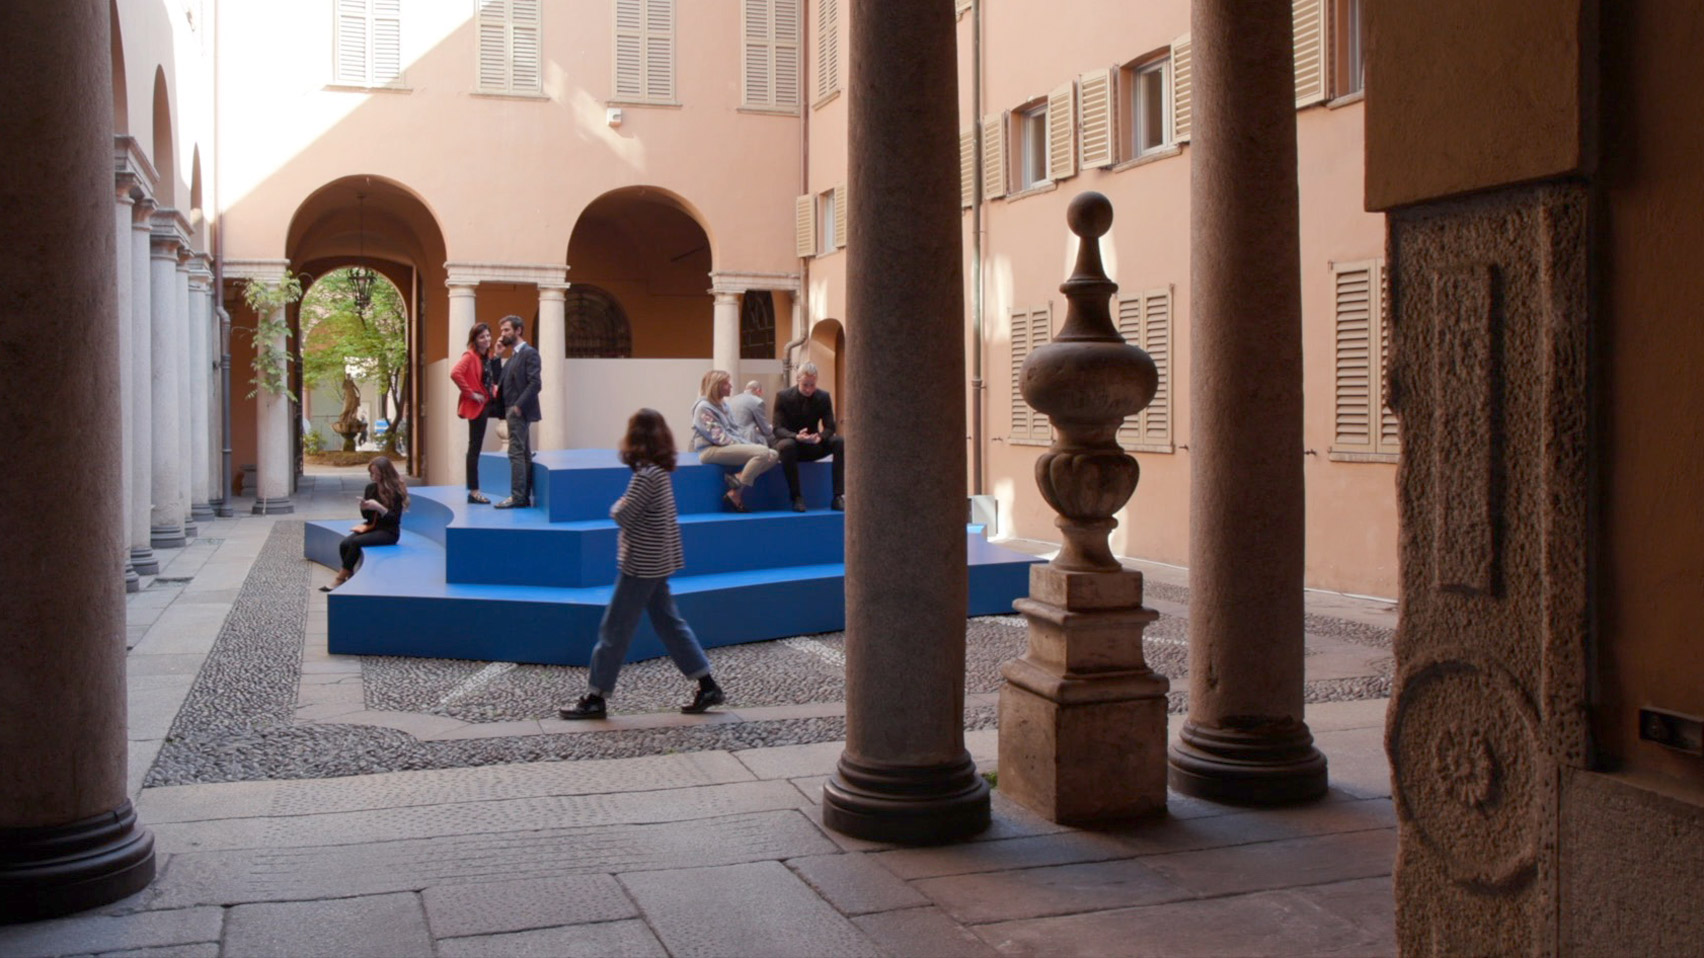   Installed in the courtyard is an amphitheatre which members of the public can access from Via Alessandro Manzoni  